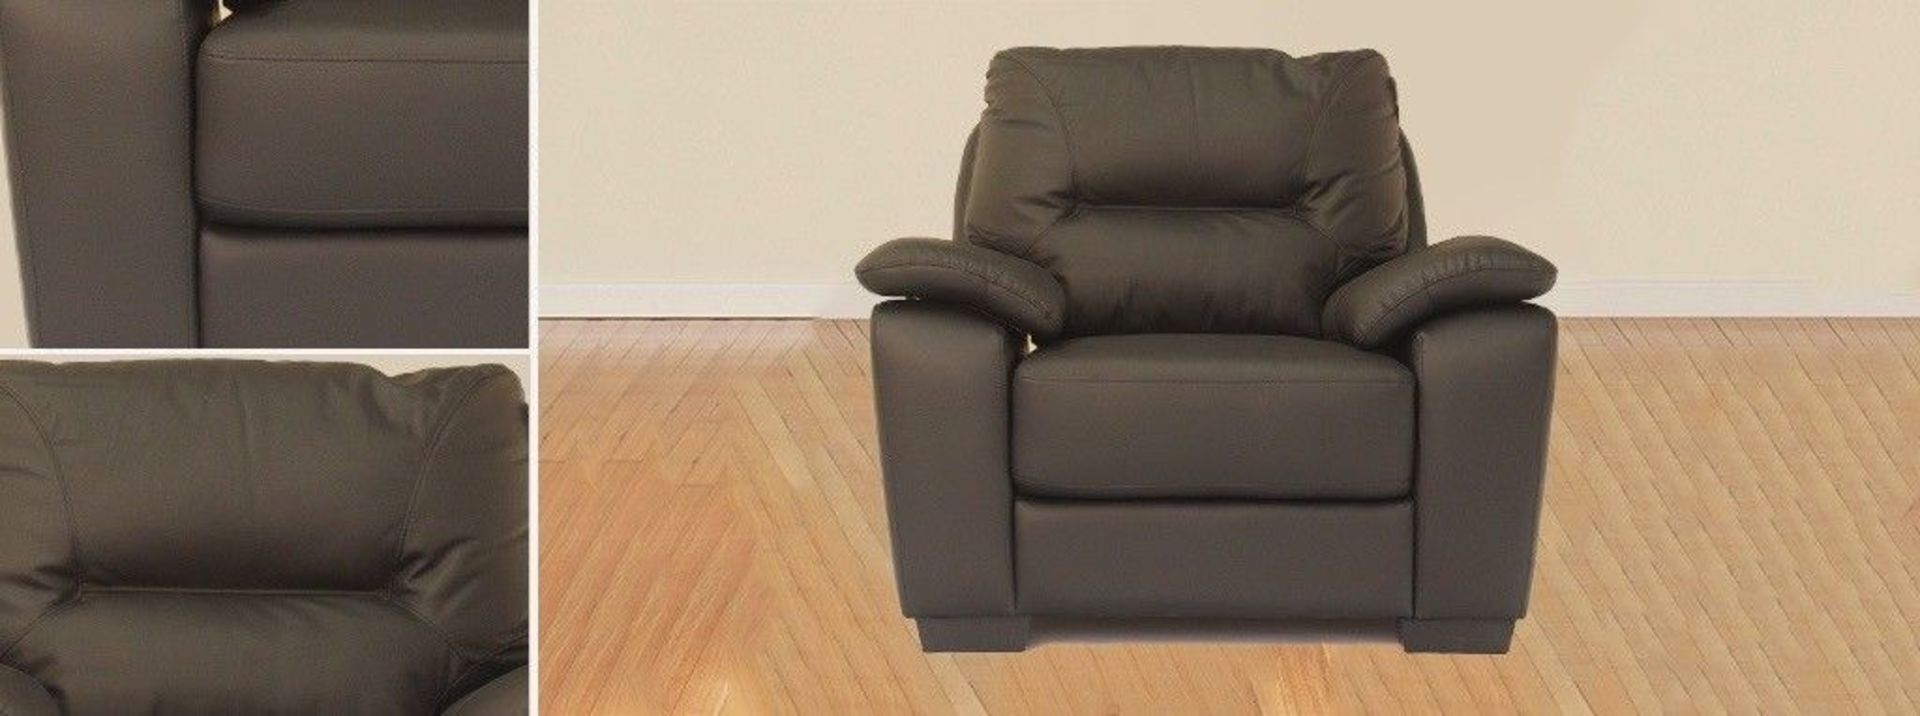 Stamford BLACK Single Seat Real Leather Chair - No Reserve - Image 2 of 3